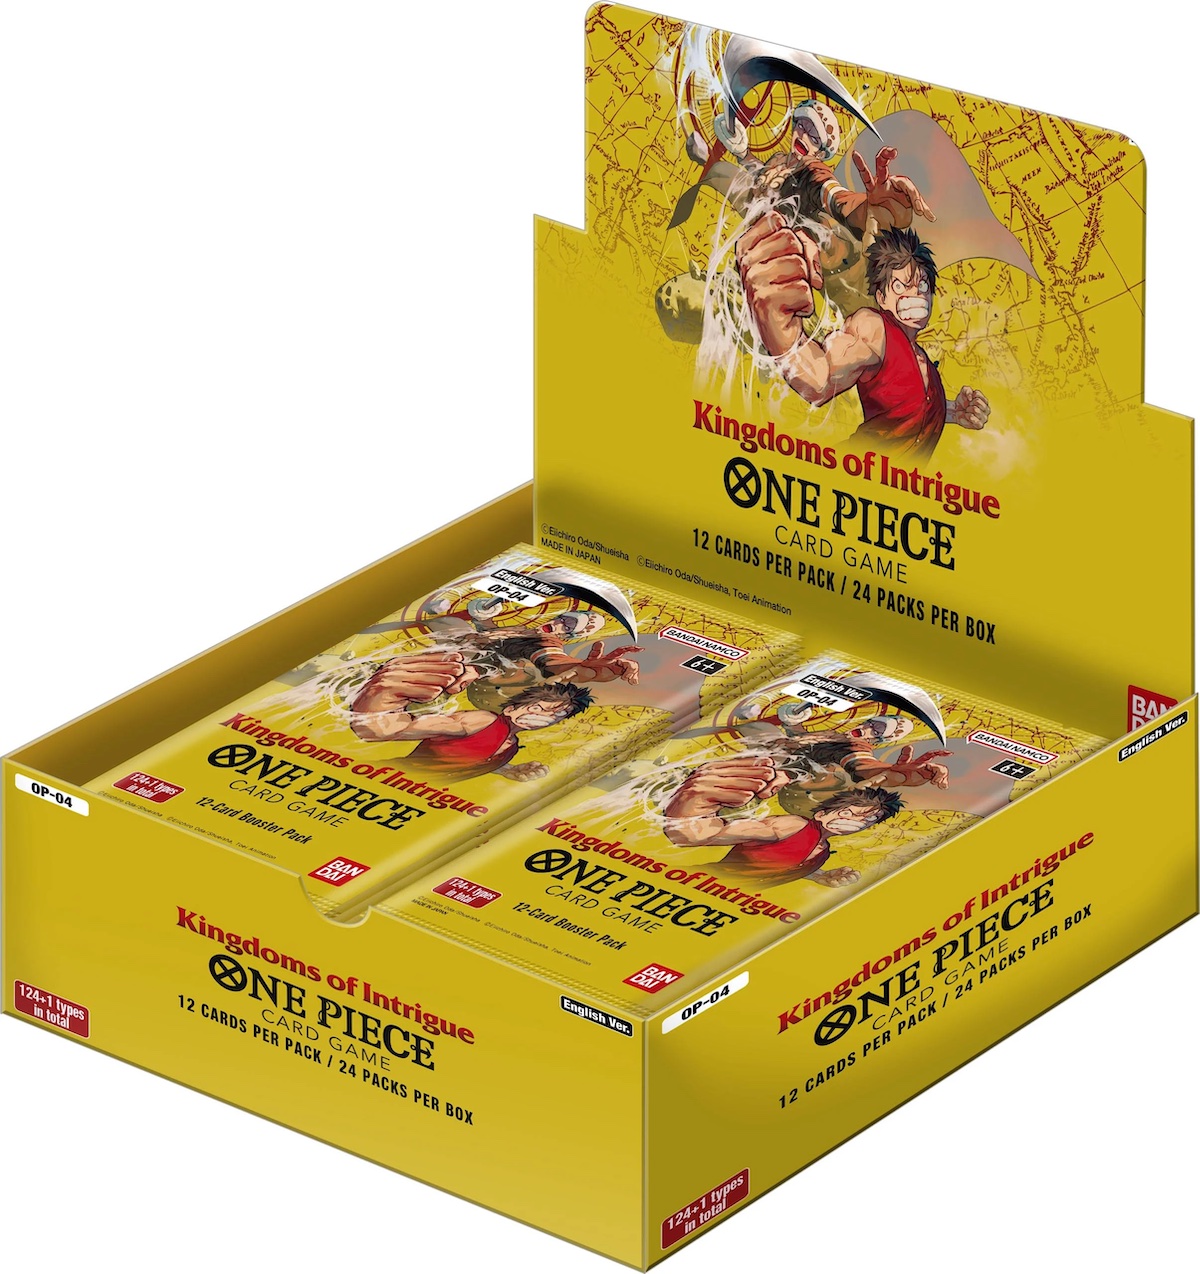 One Piece: Kingdoms of Intrigue: Booster Box